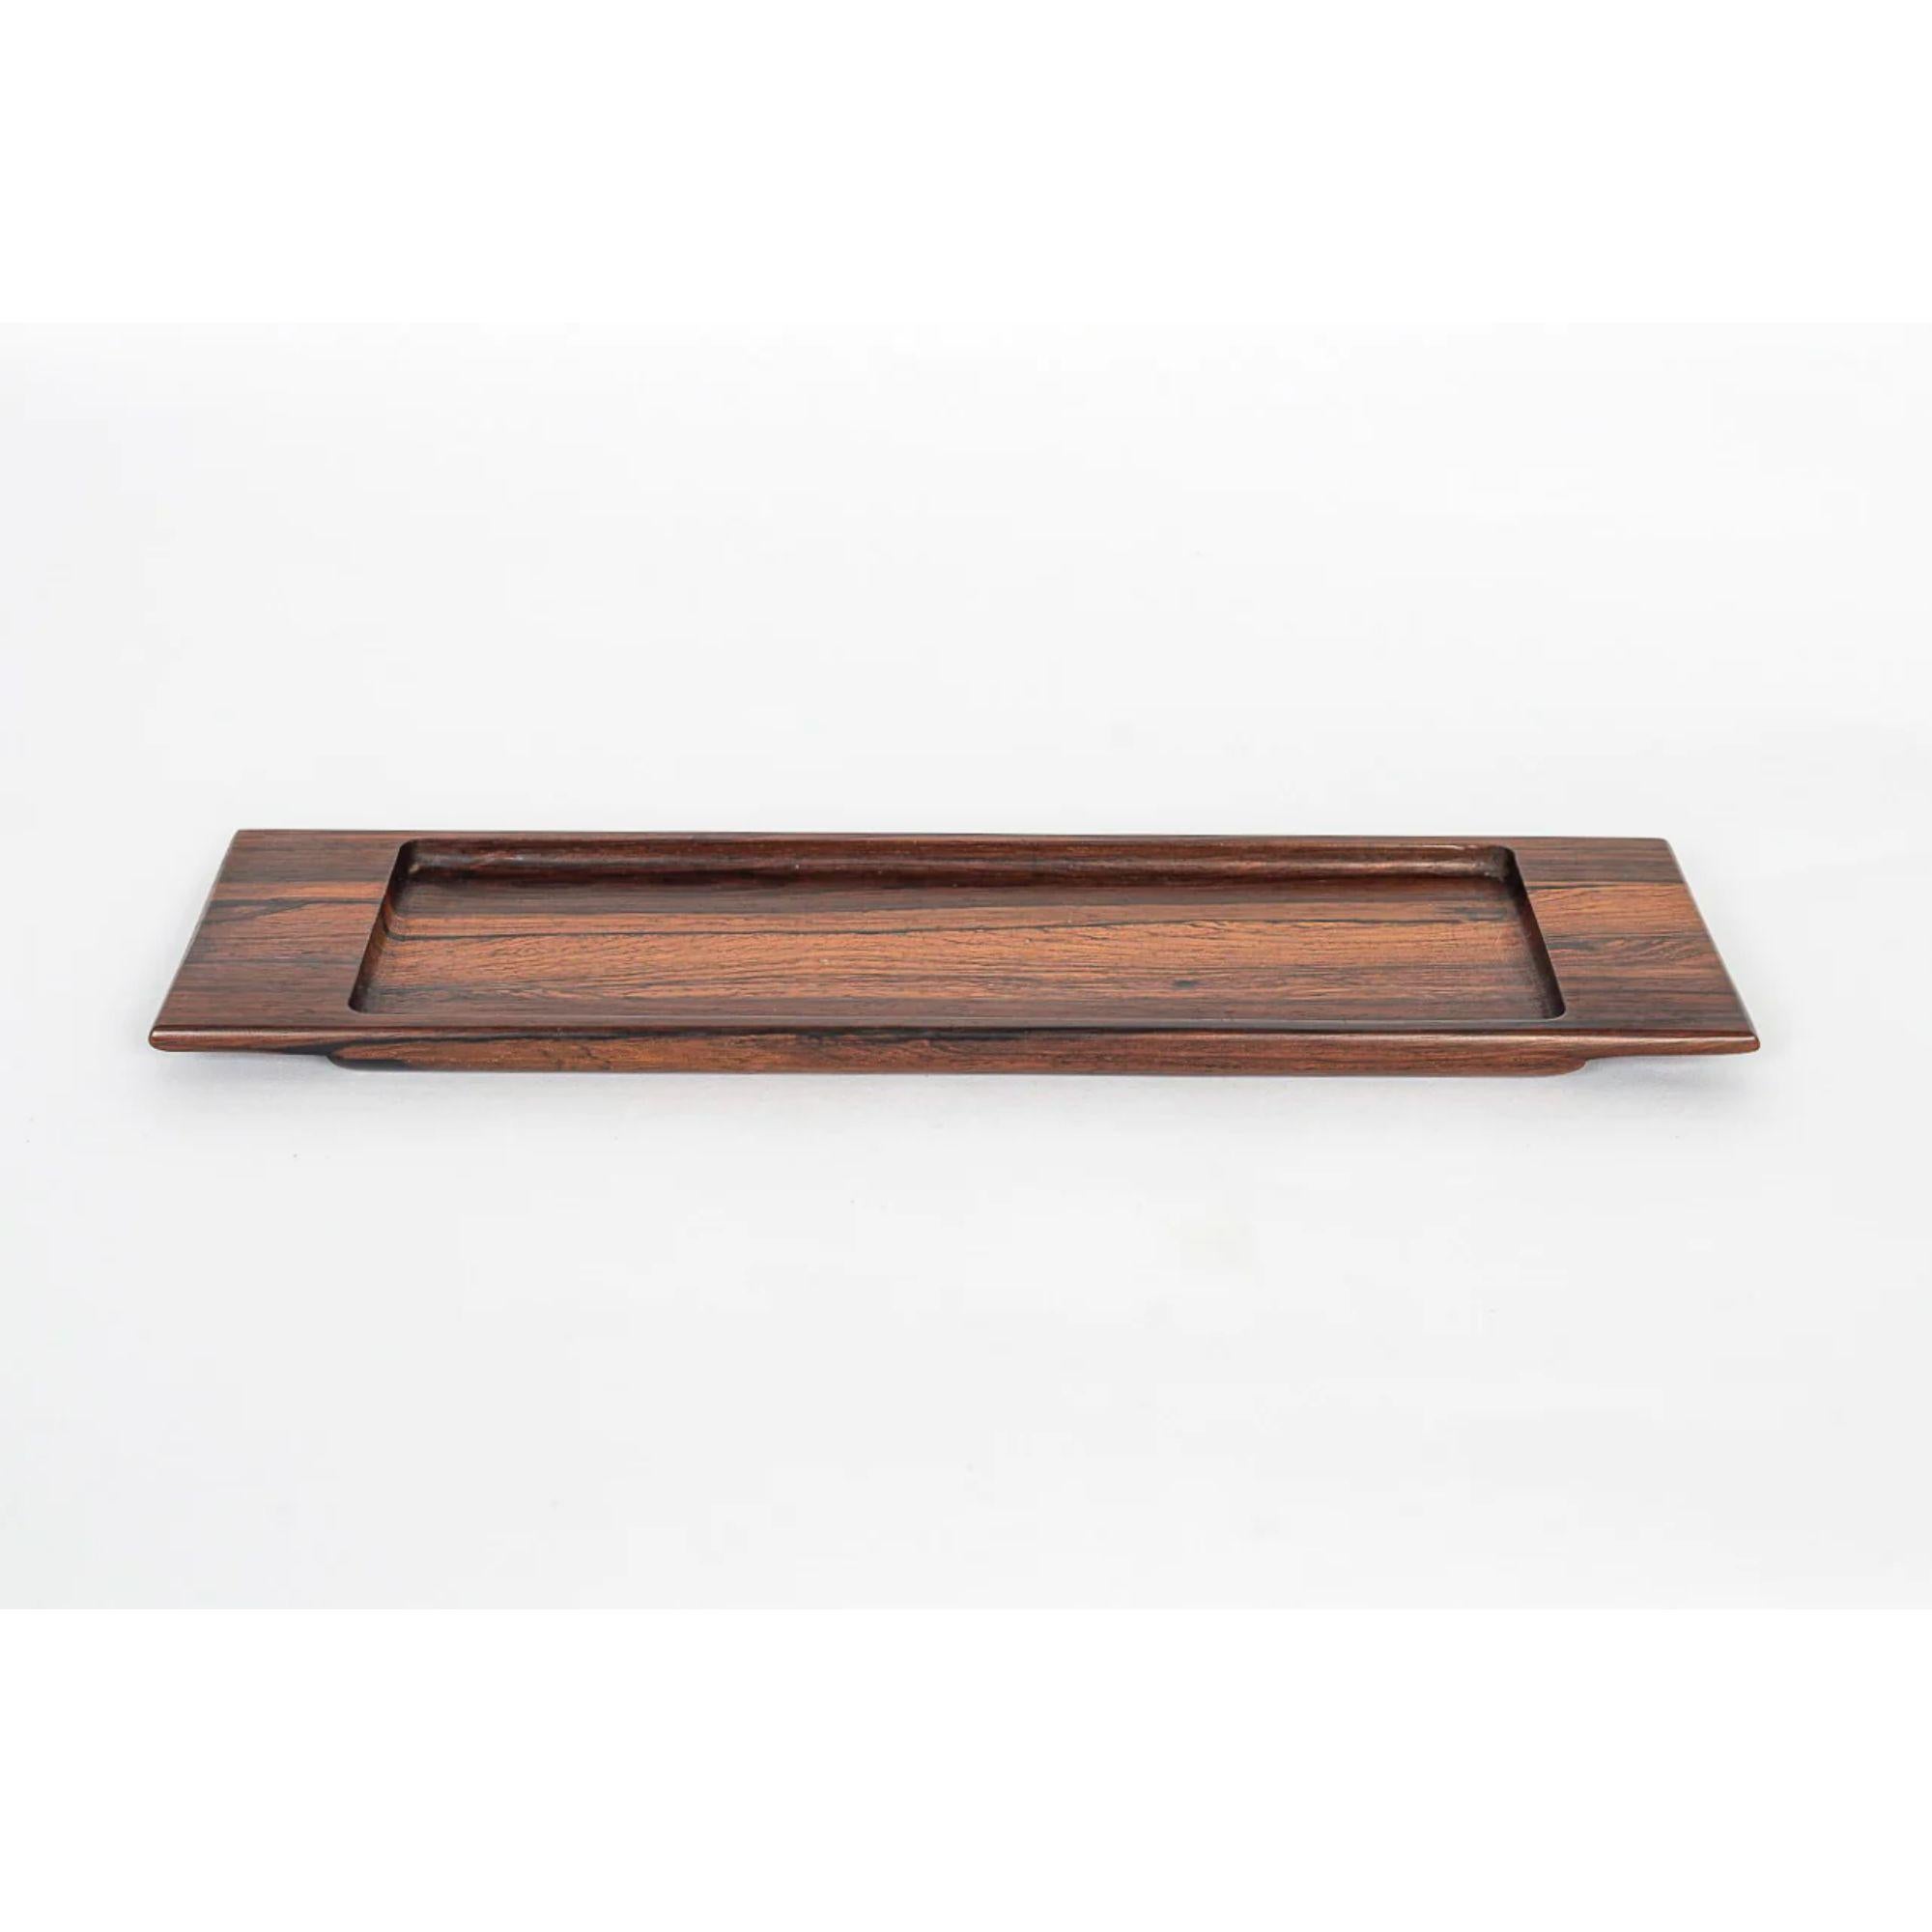 20th Century Vintage Midcentury Decorative Tray in Rosewood by Jean Gillon, 1960s